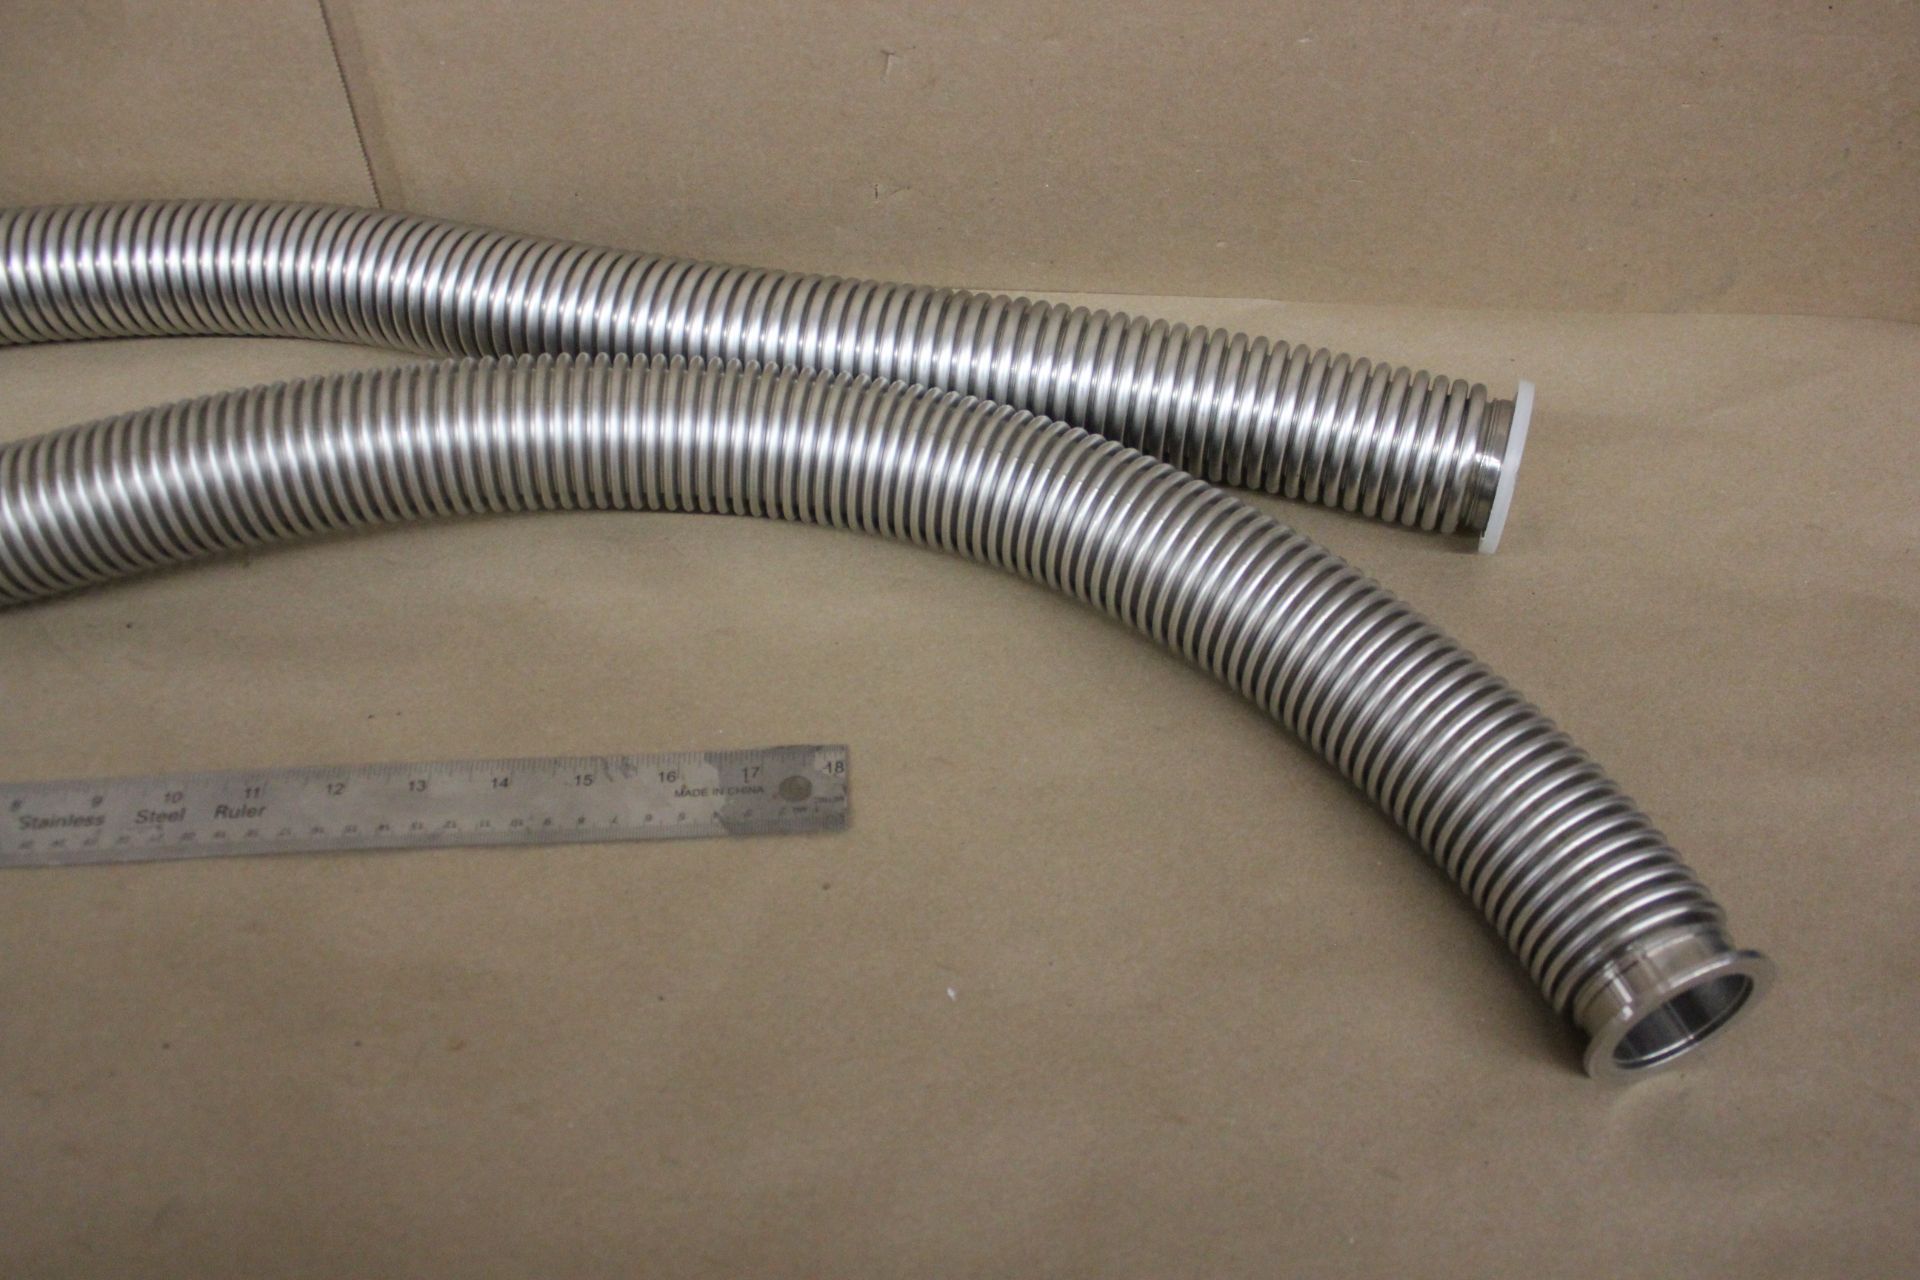 LOT OF 2 FLEXIBLE BELLOWS VACUUM HOSES - Image 4 of 7